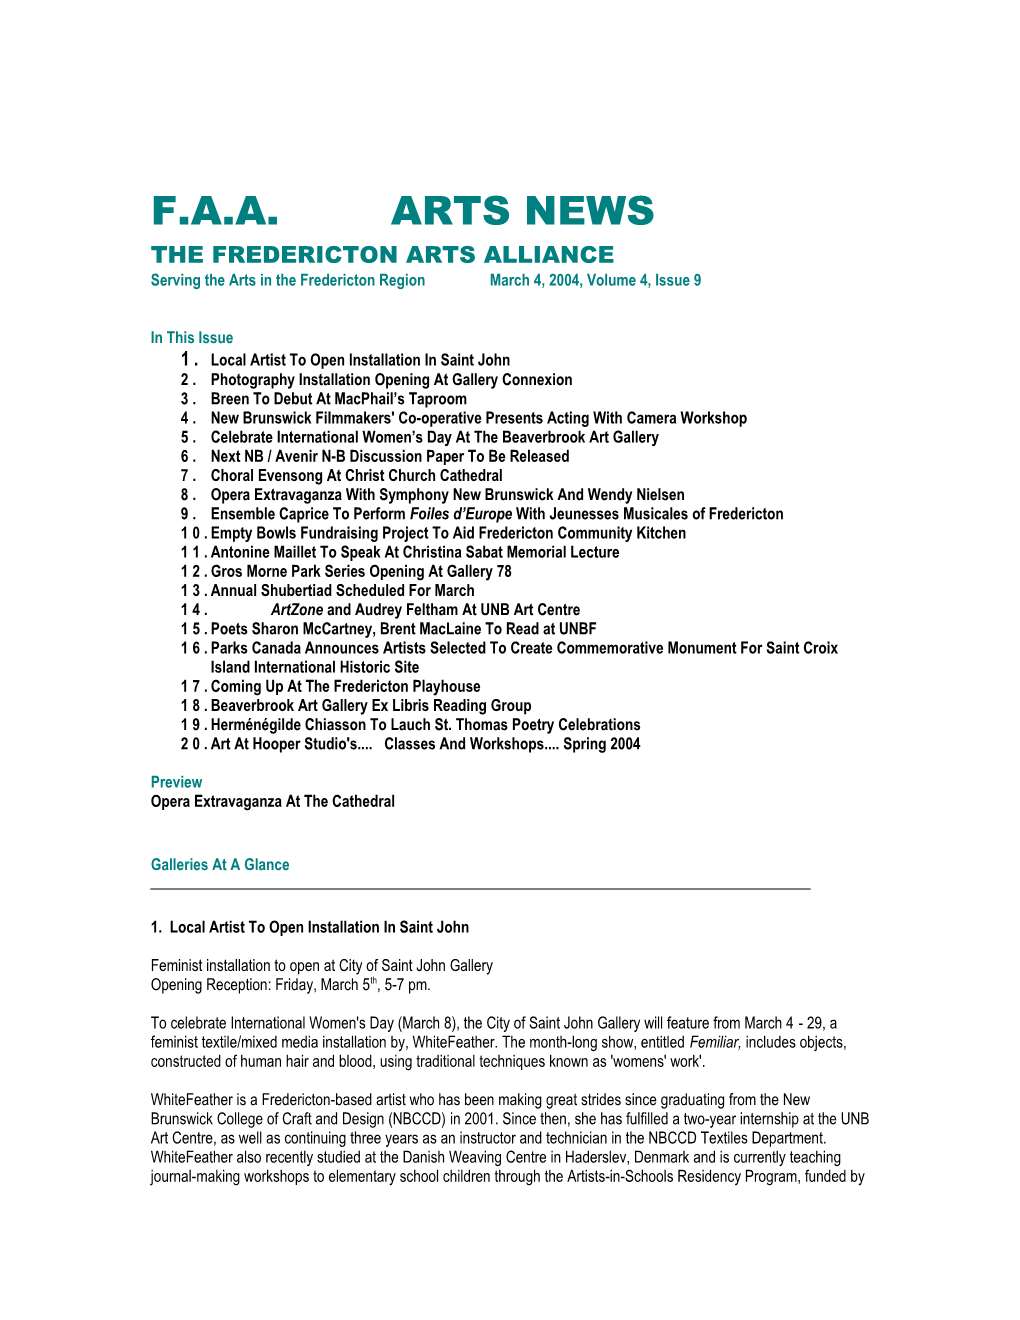 F.A.A. ARTS NEWS the FREDERICTON ARTS ALLIANCE Serving the Arts in the Fredericton Region March 4, 2004, Volume 4, Issue 9